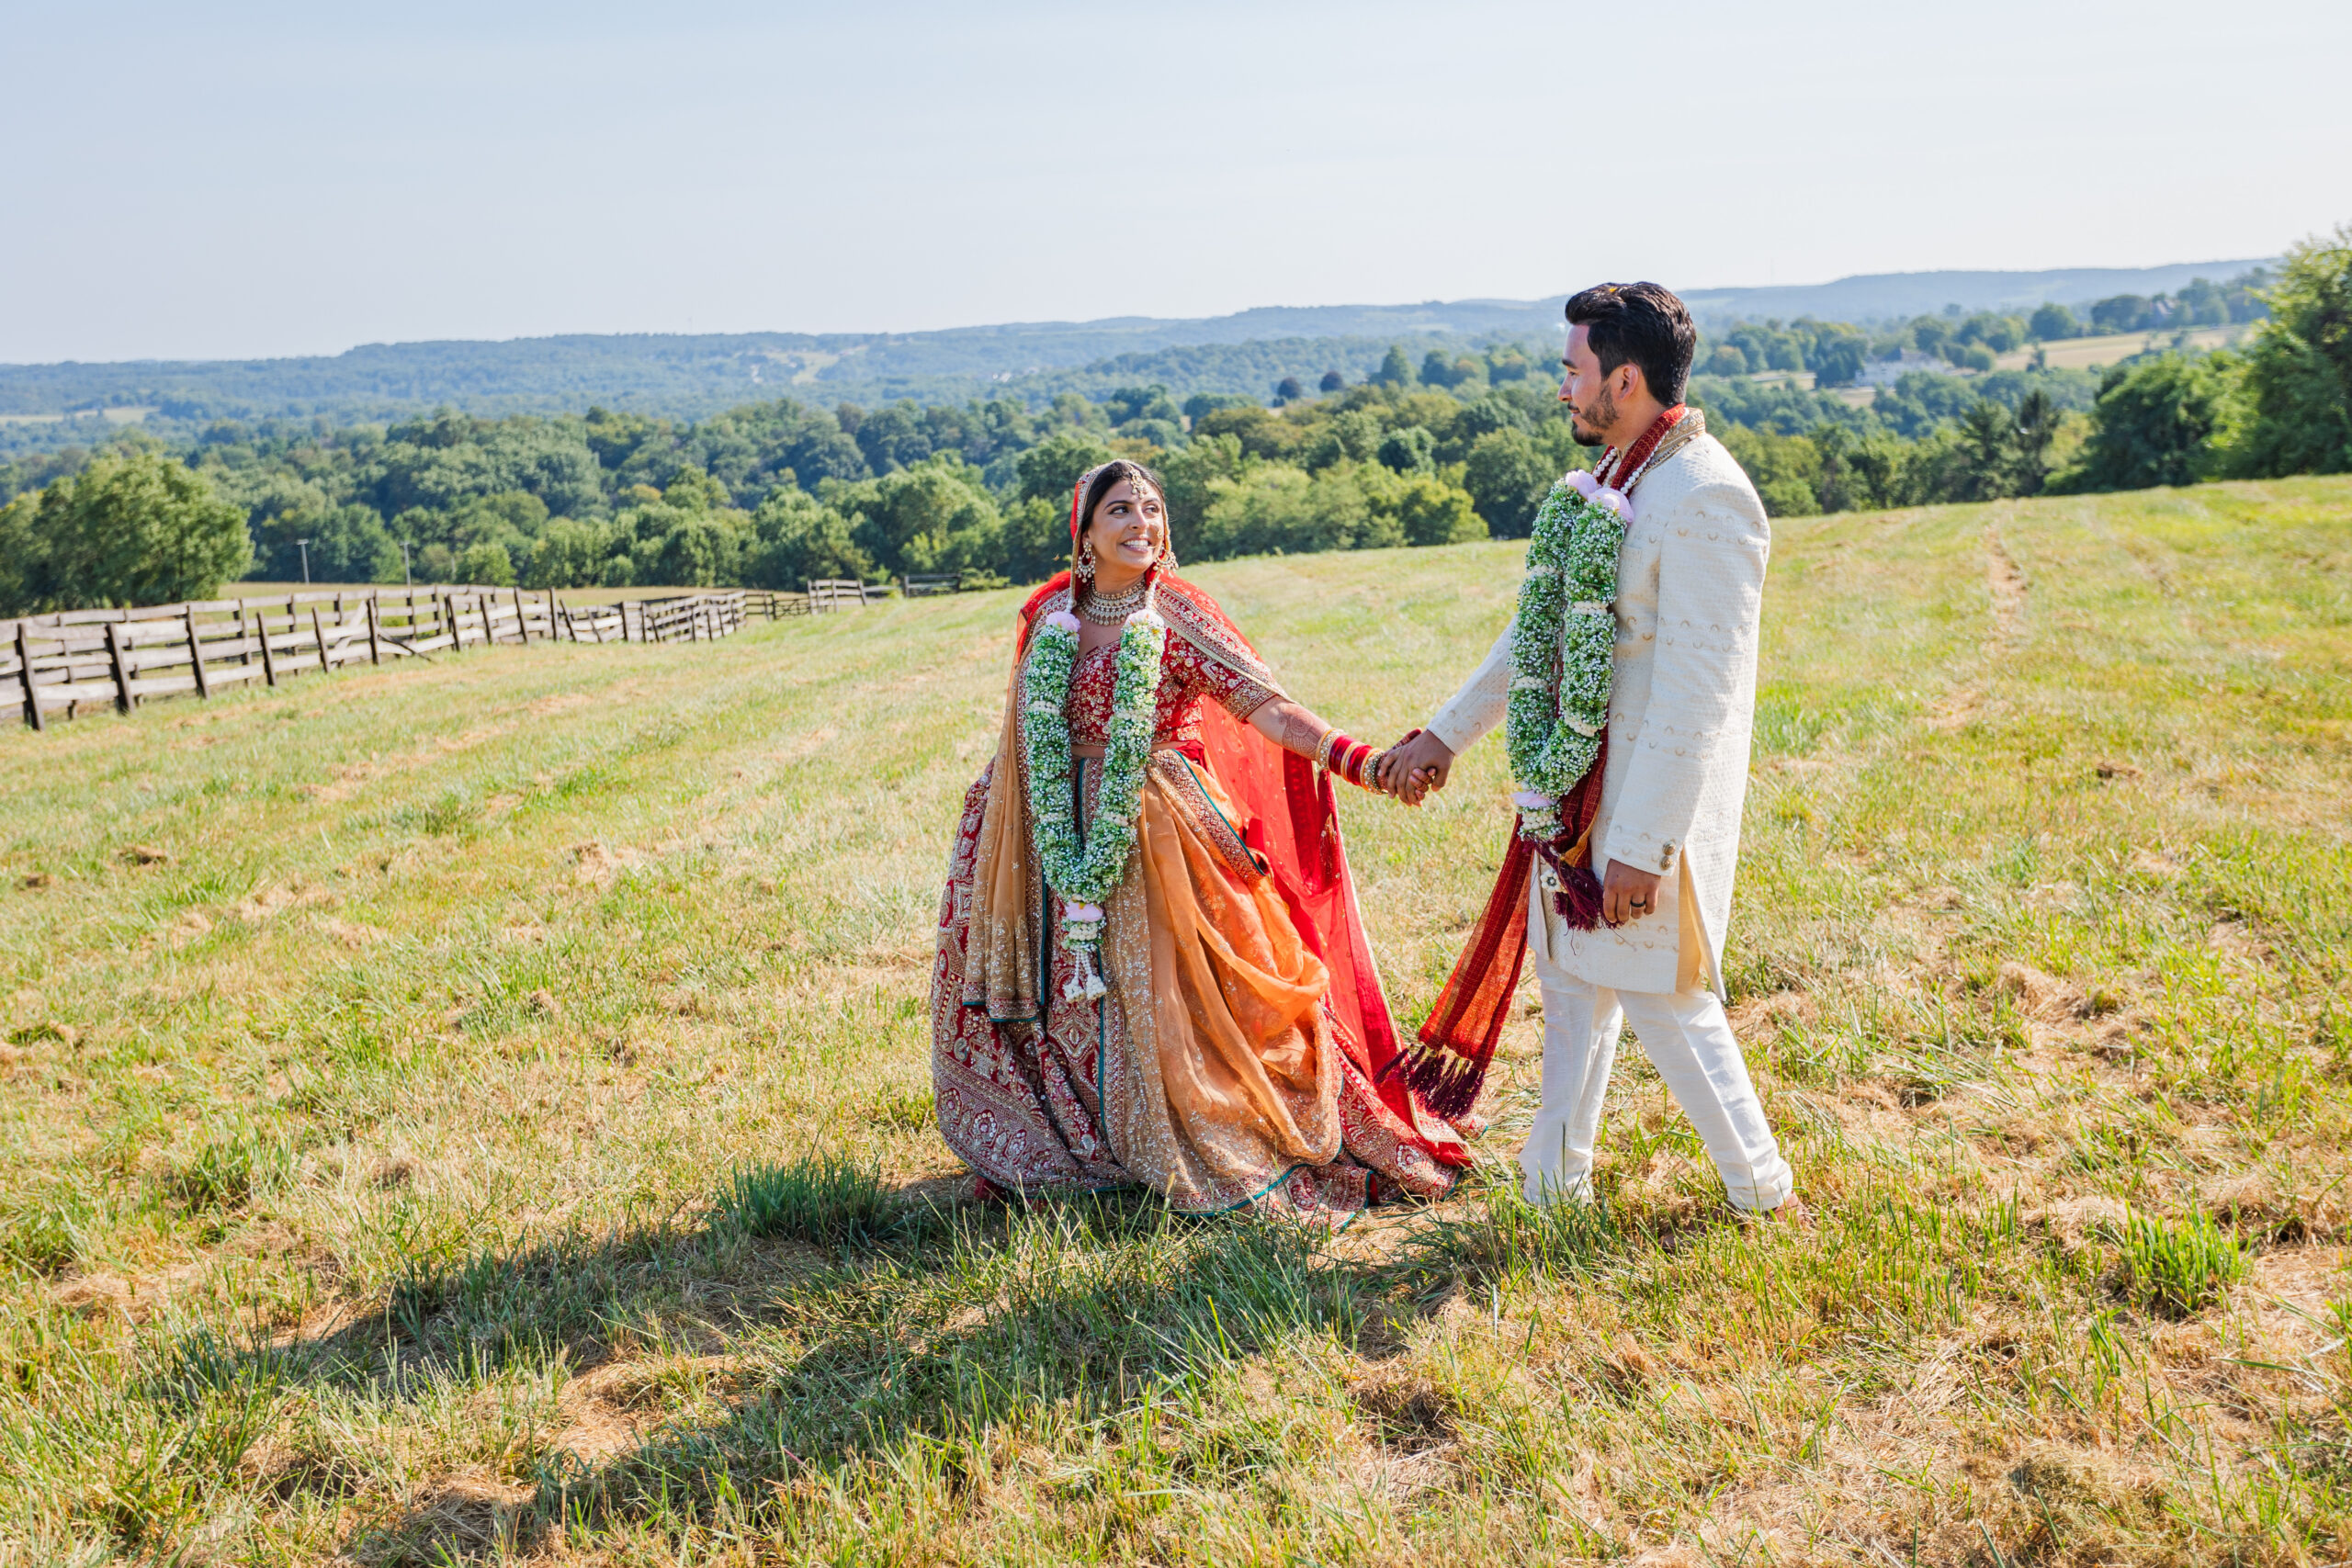 Bride & Groom dressed in traditional Indian garments hold hands and walk through an open field.